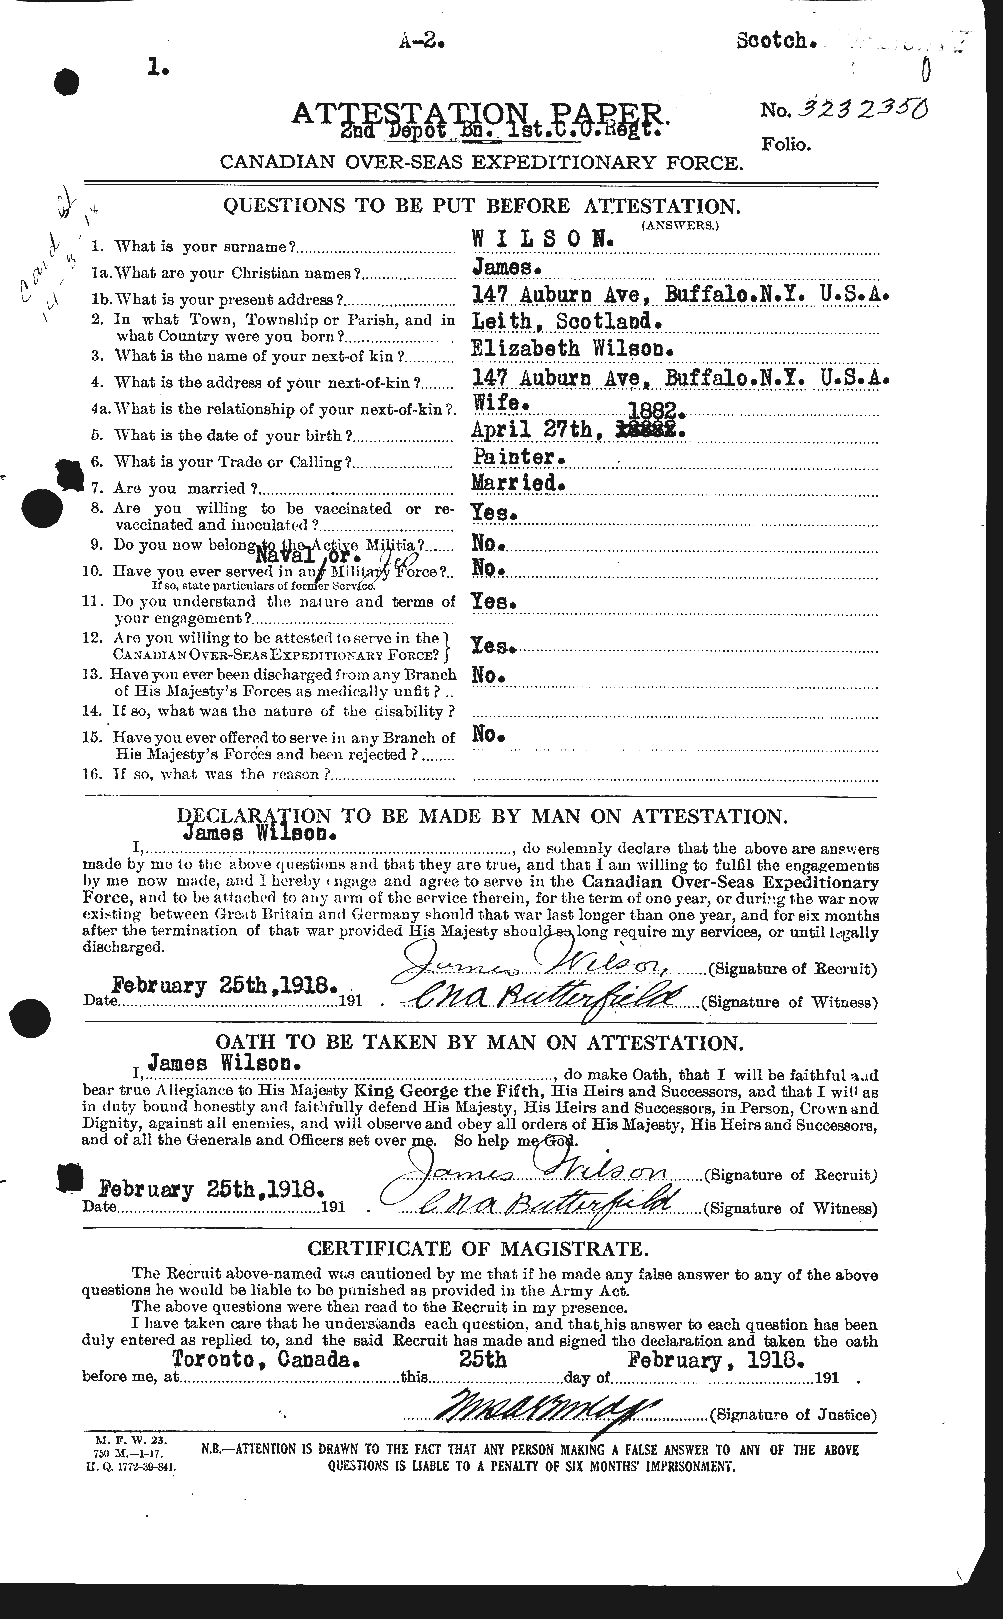 Personnel Records of the First World War - CEF 681393a